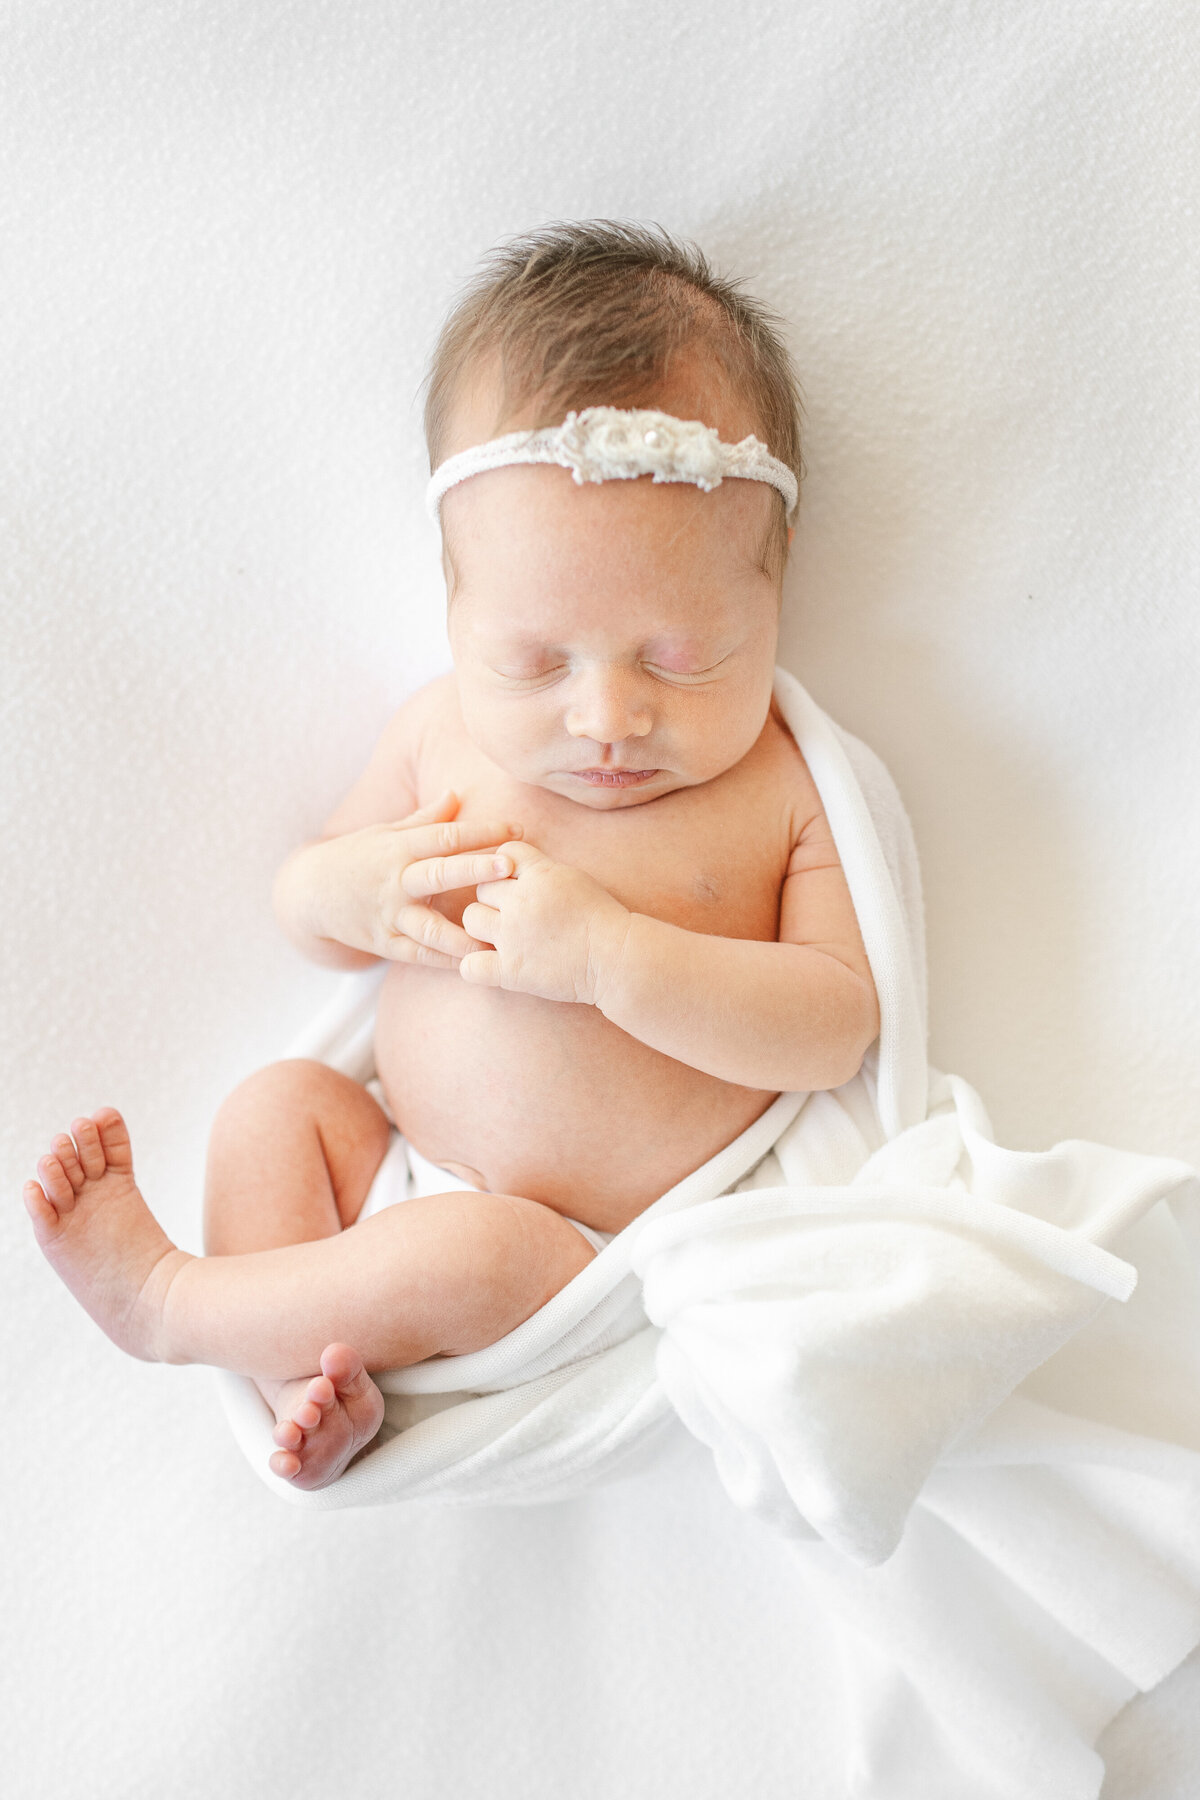 MMP Greeville SC In Home Newborn Session-9113